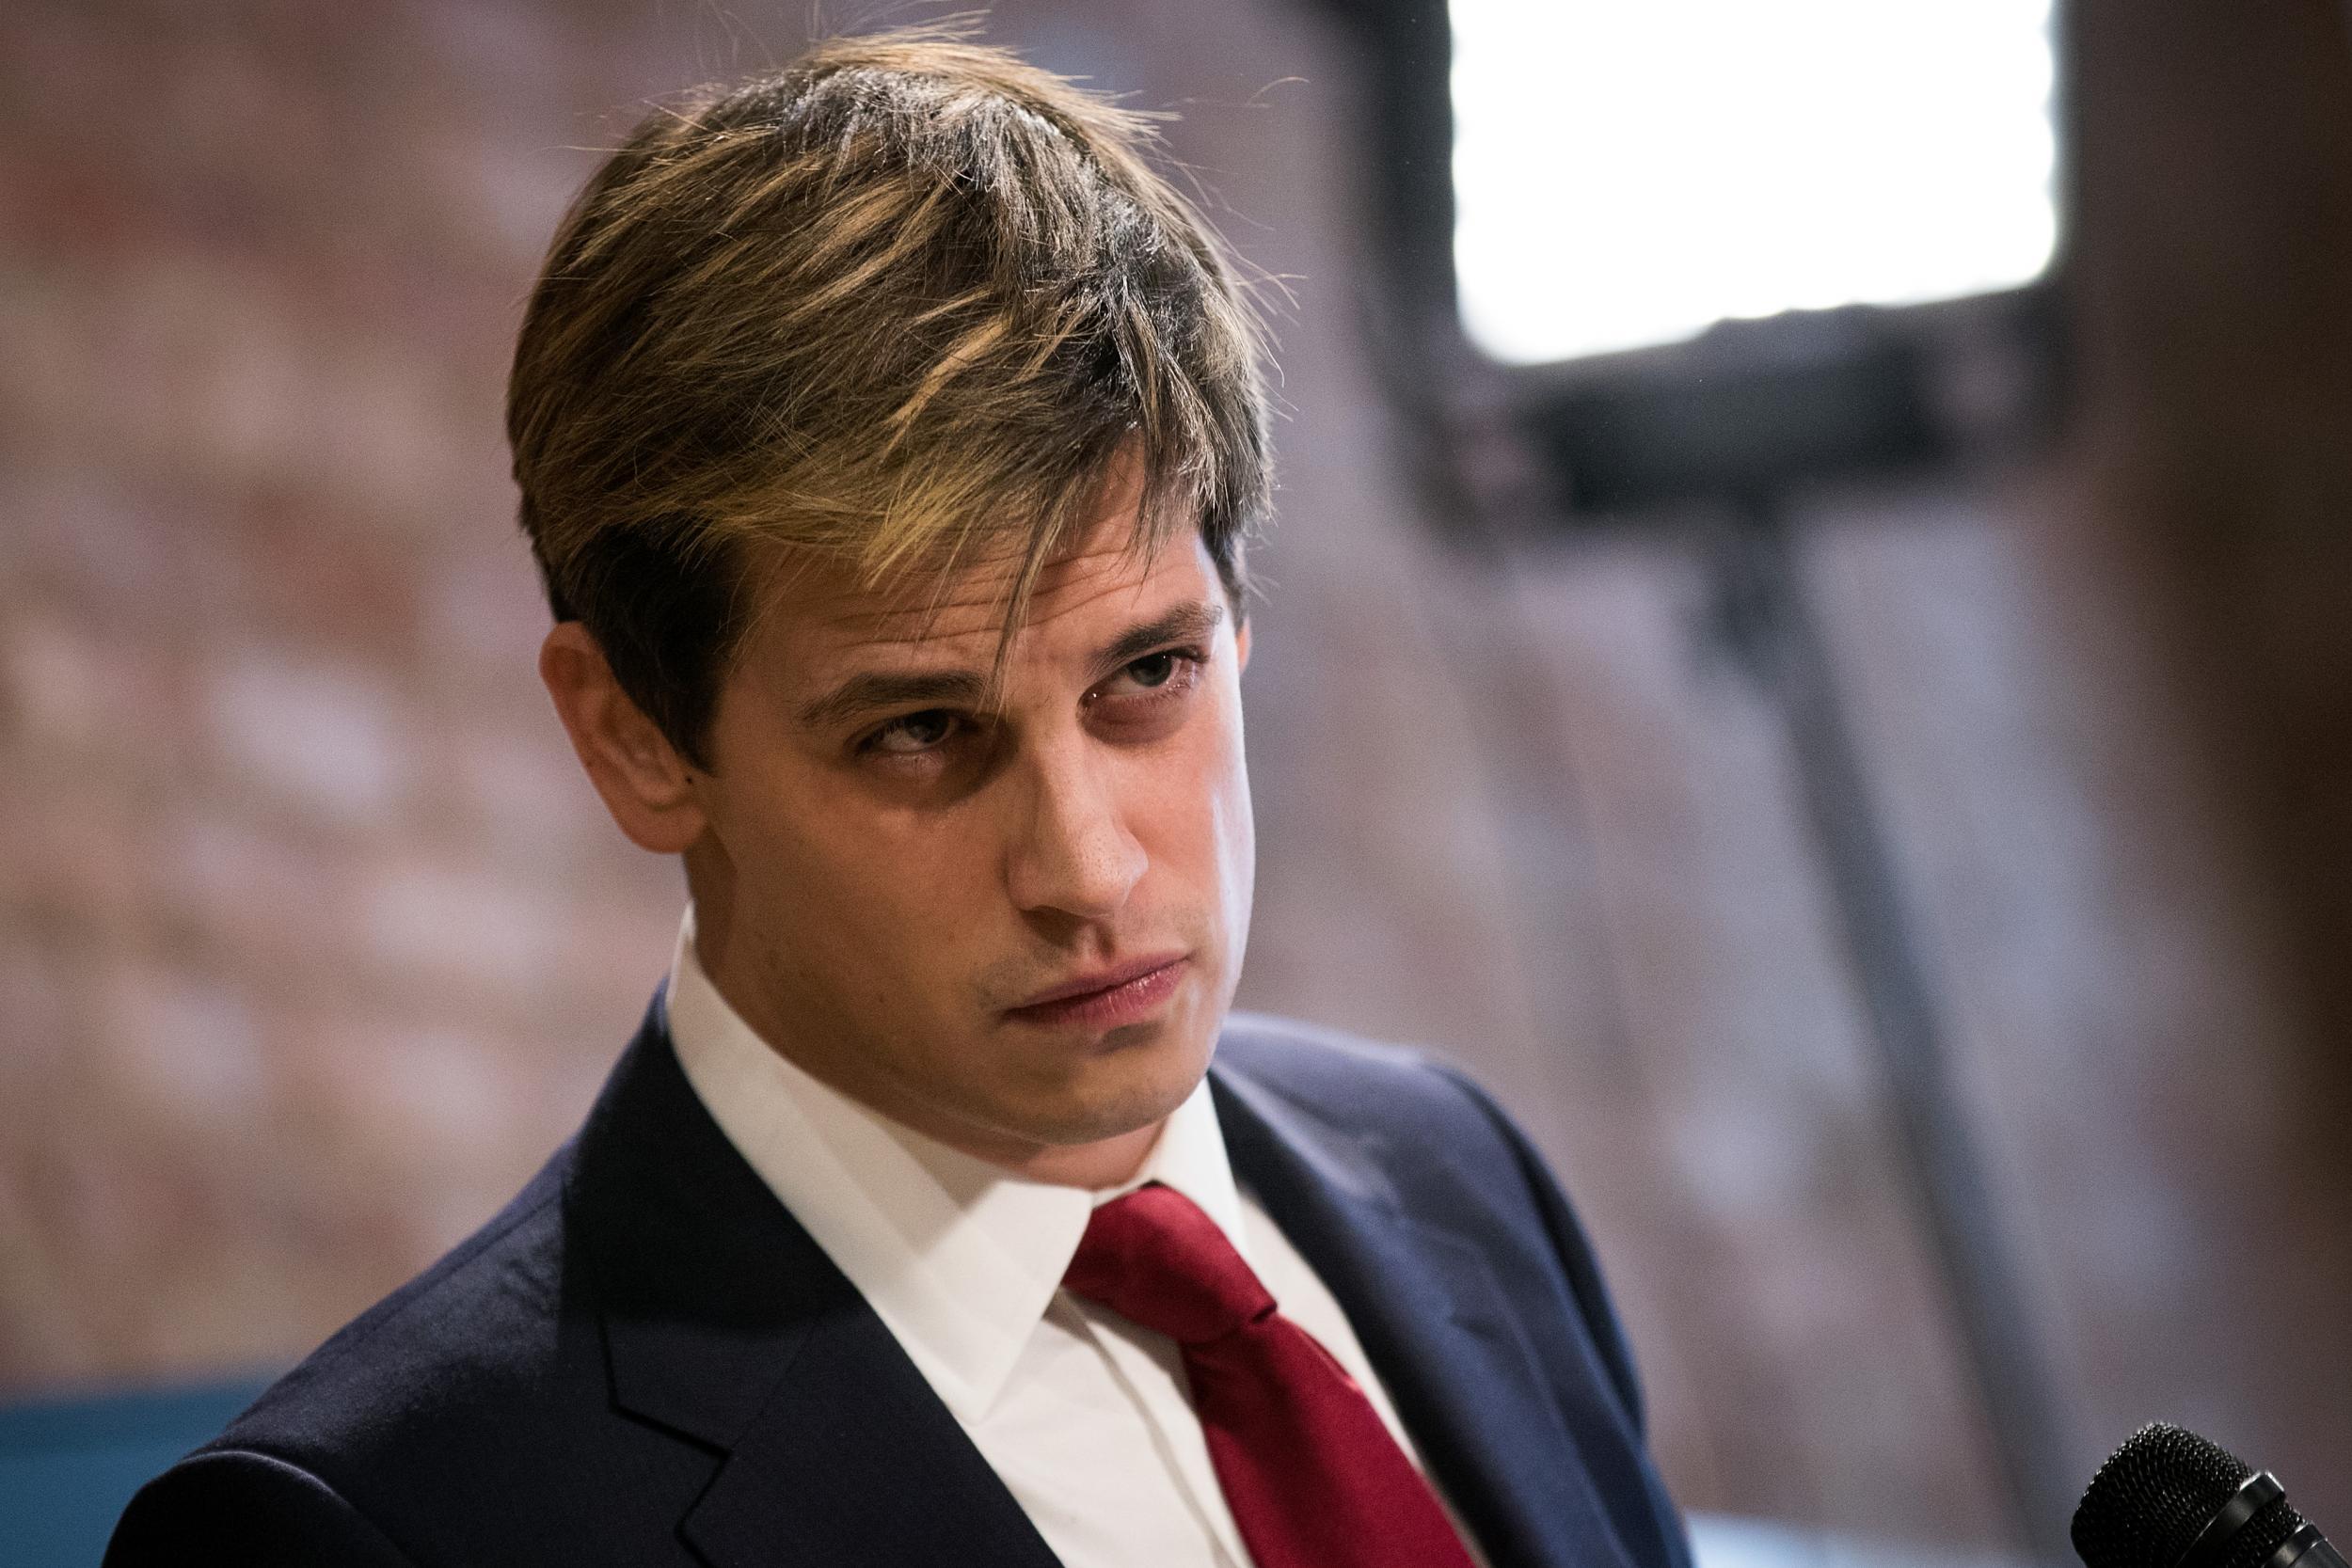 Controversial right-wing commentator Milo Yiannopoulos